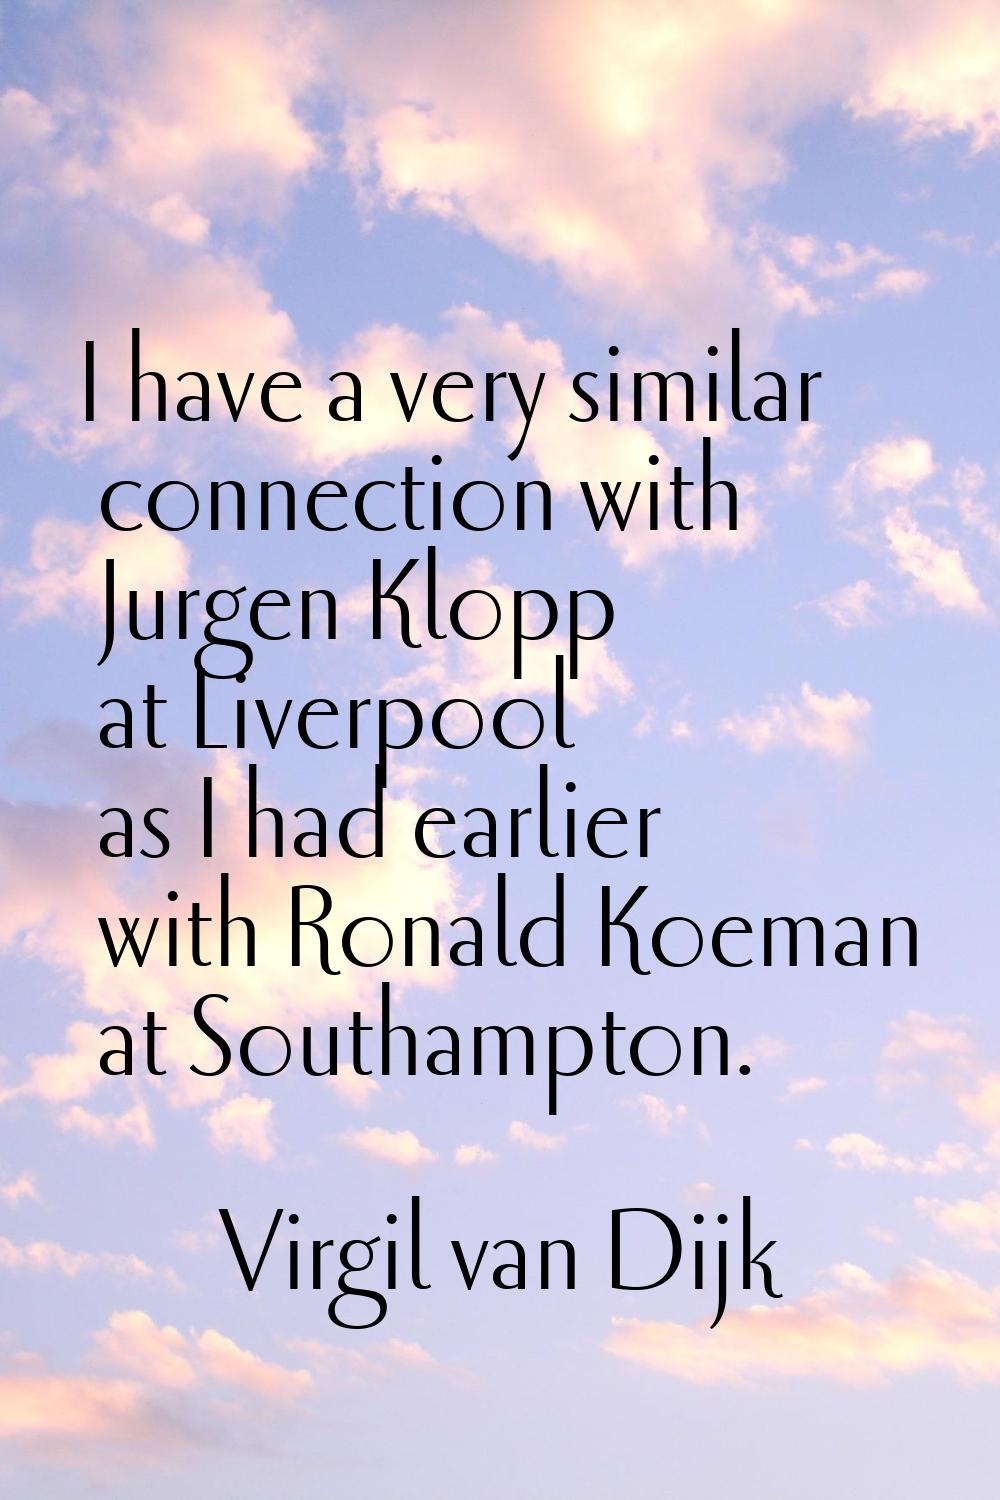 I have a very similar connection with Jurgen Klopp at Liverpool as I had earlier with Ronald Koeman